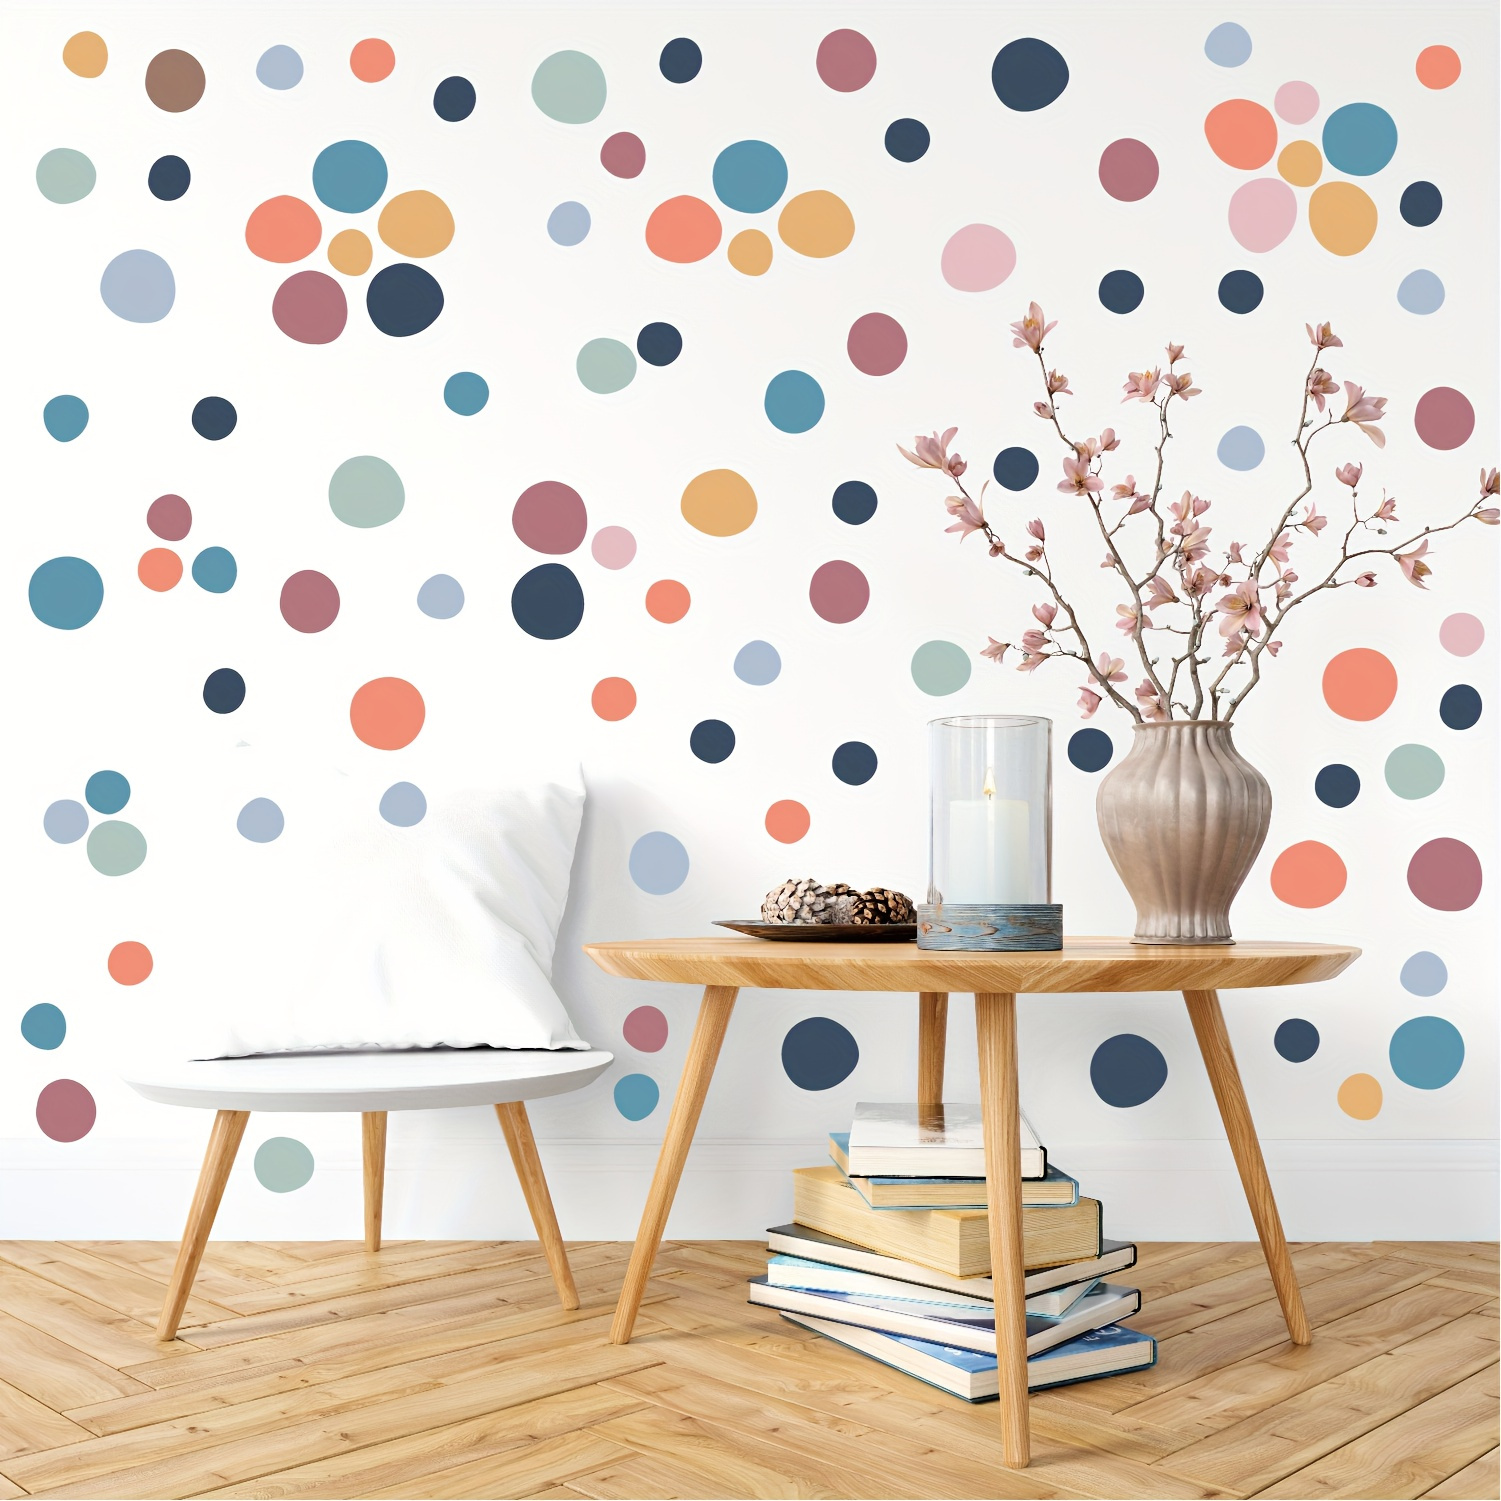 

120 Pieces/4 Sheets Of Bohemian Style Colorful Polka Dot Wall Stickers, Irregular Self-adhesive Home Decoration For Back-to-school Season, School Wall Decoration, Bedroom Wall Art Stickers